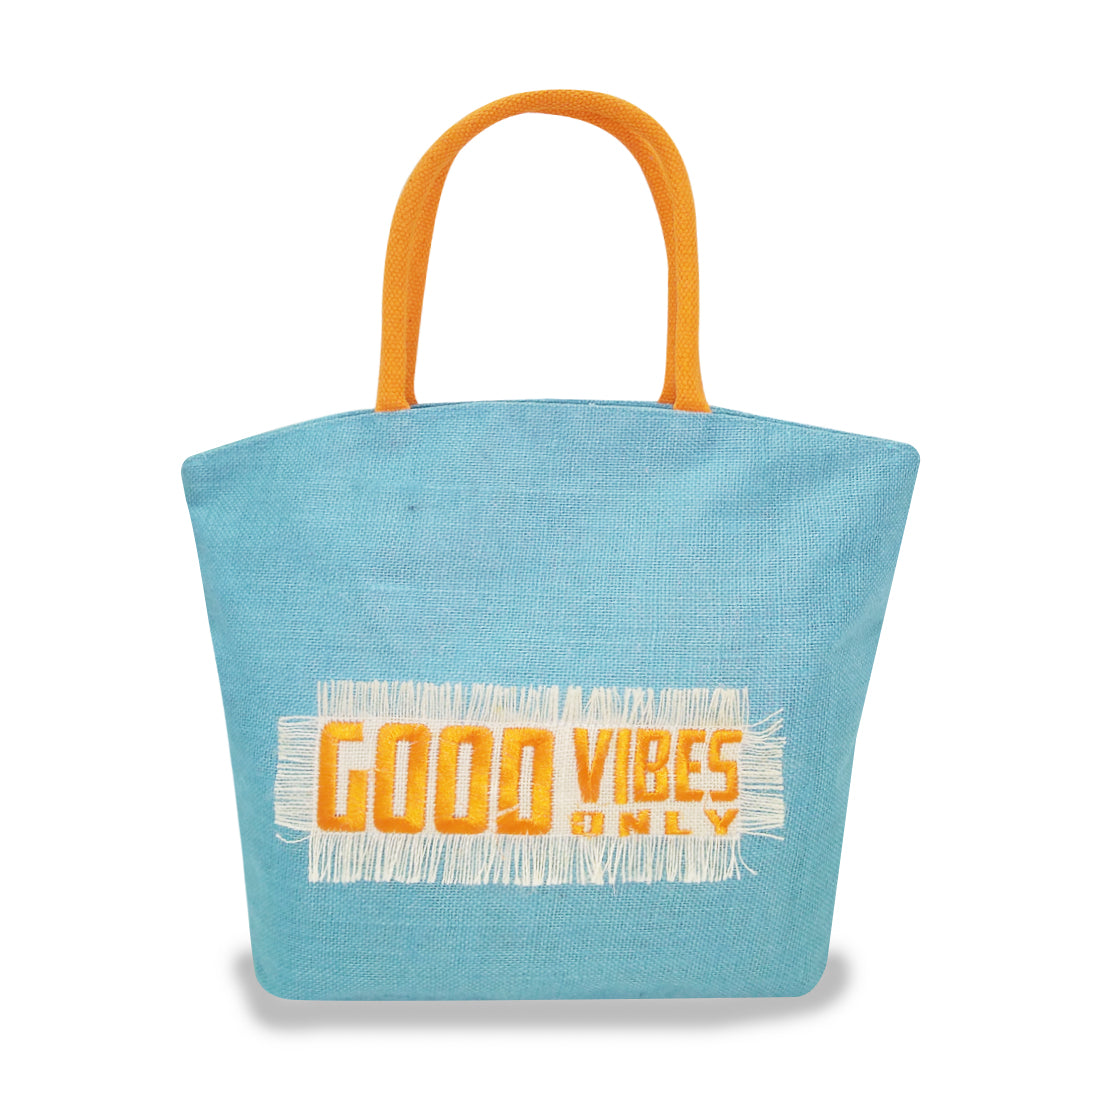 GOOD VIBES ONLY JUTE BAG